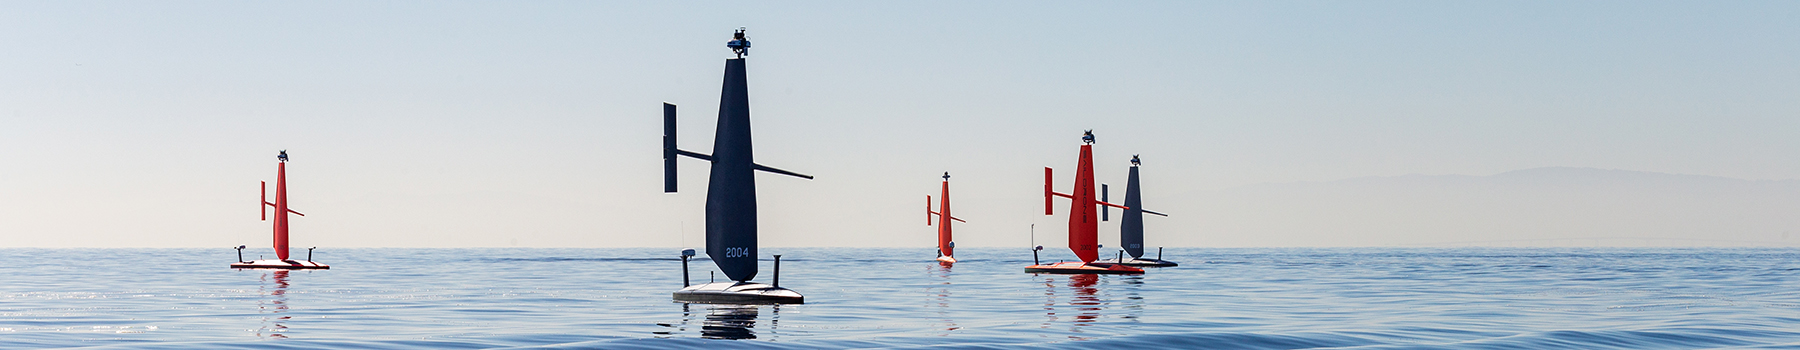 Saildrone Voyagers in water